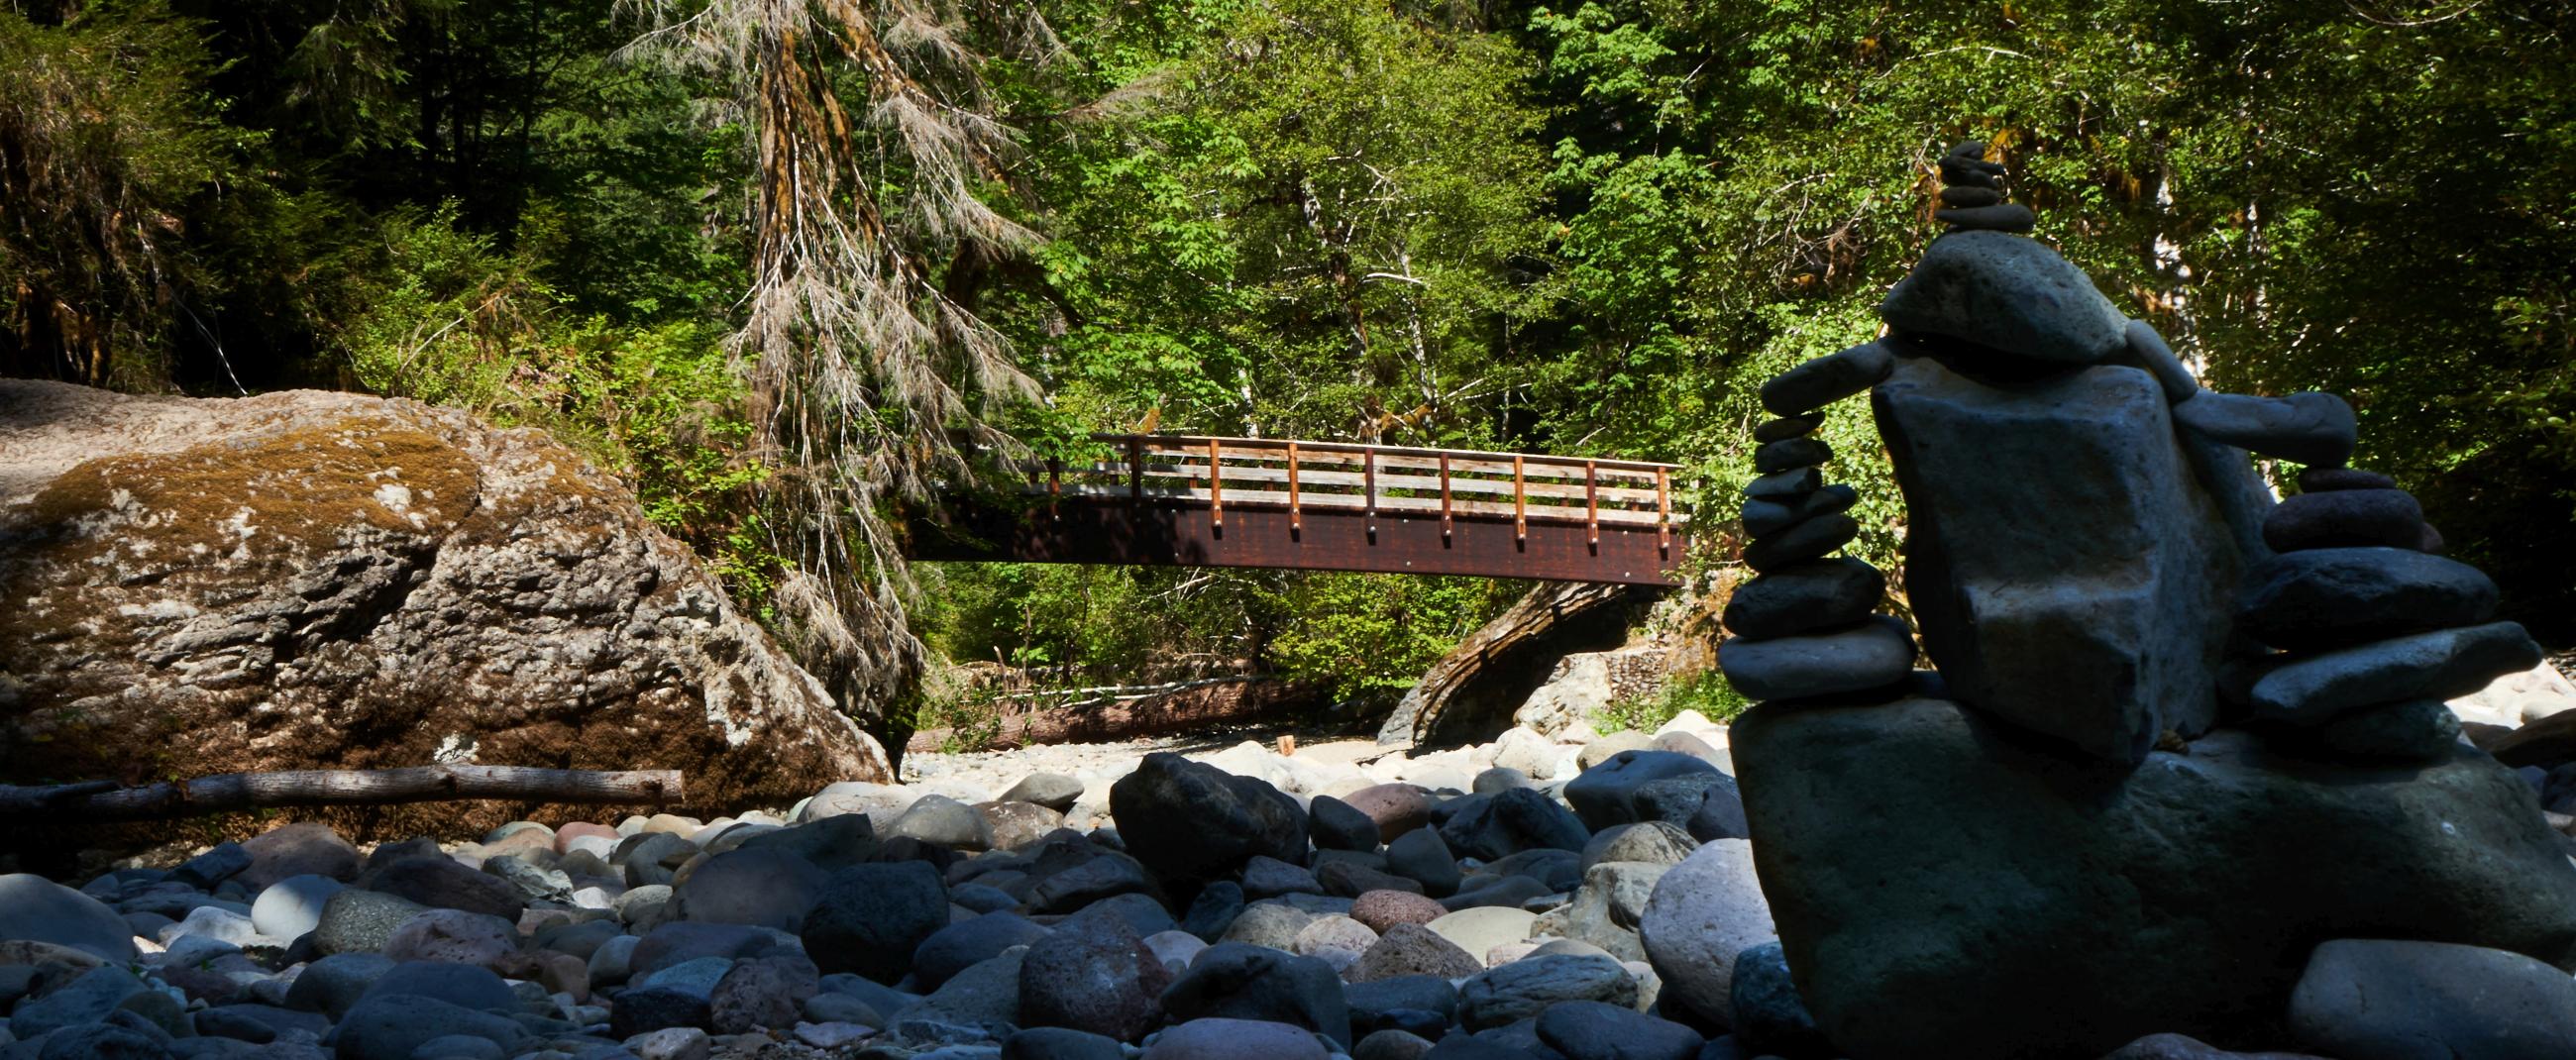 View of wooden bridge with a stack of rocks in the foreground